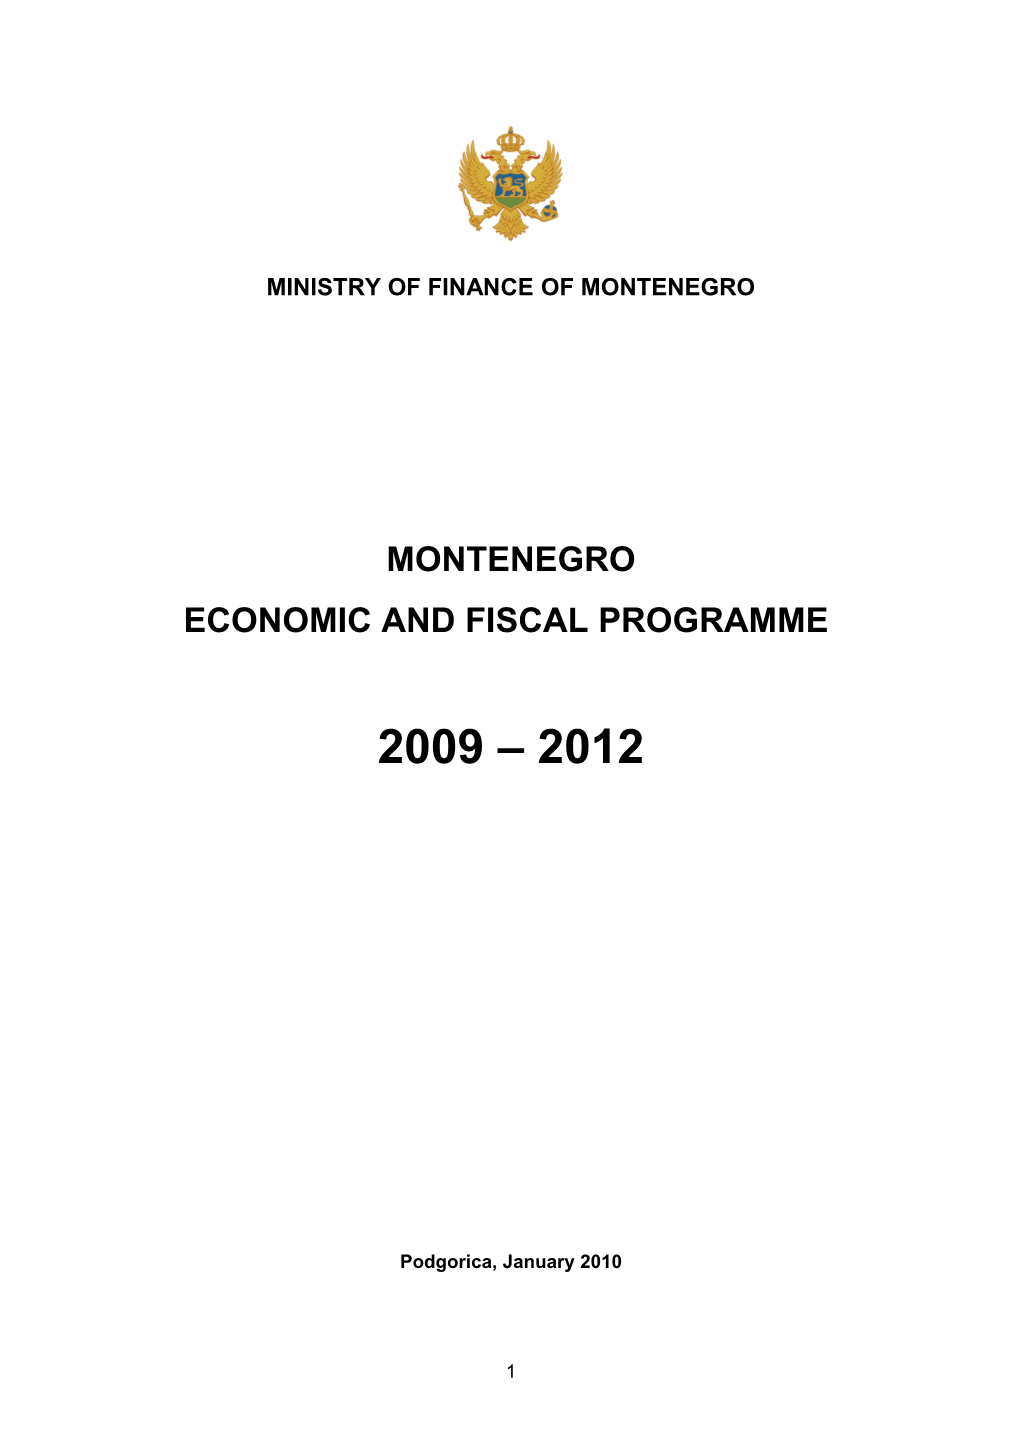 Economic and Fiscal Programme